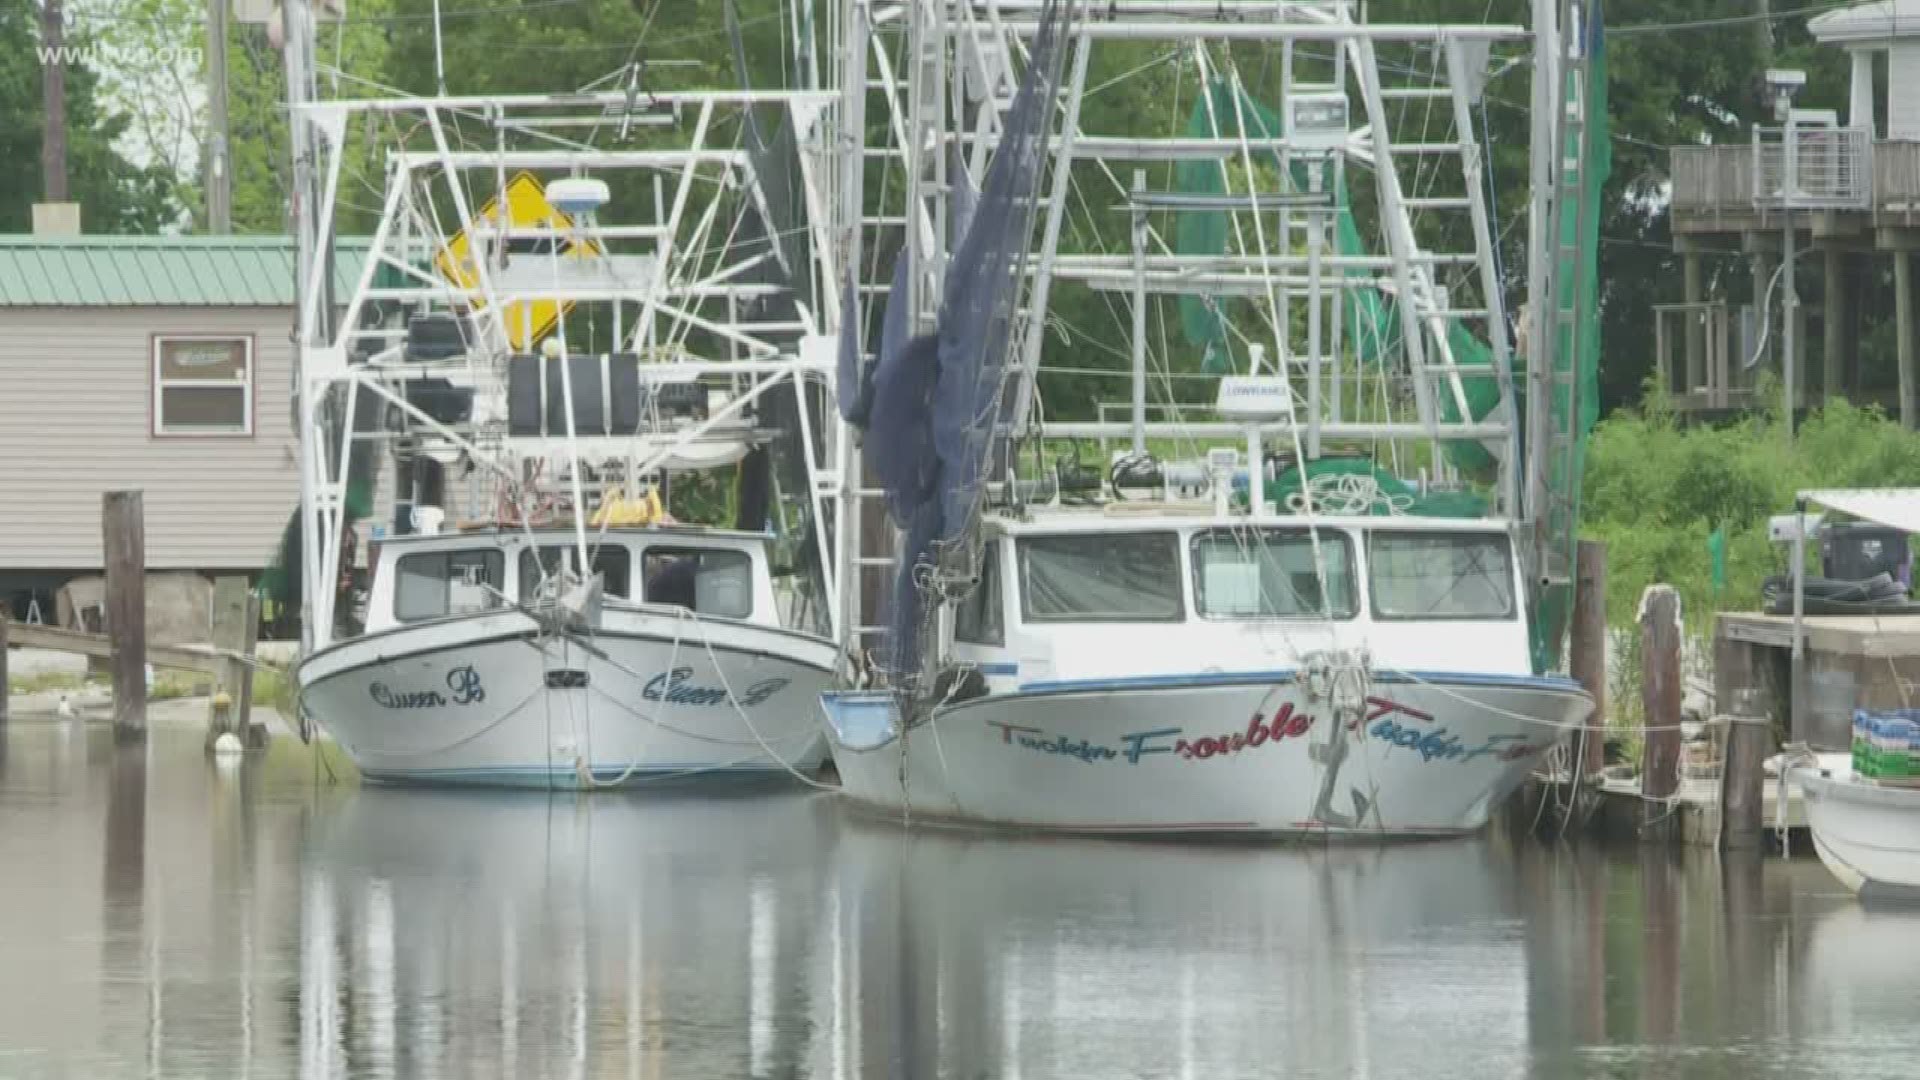 What fishermen really want is for the Bonnet Carre Spillway to close, which officials say they expect to happen between July 15 and July 18.